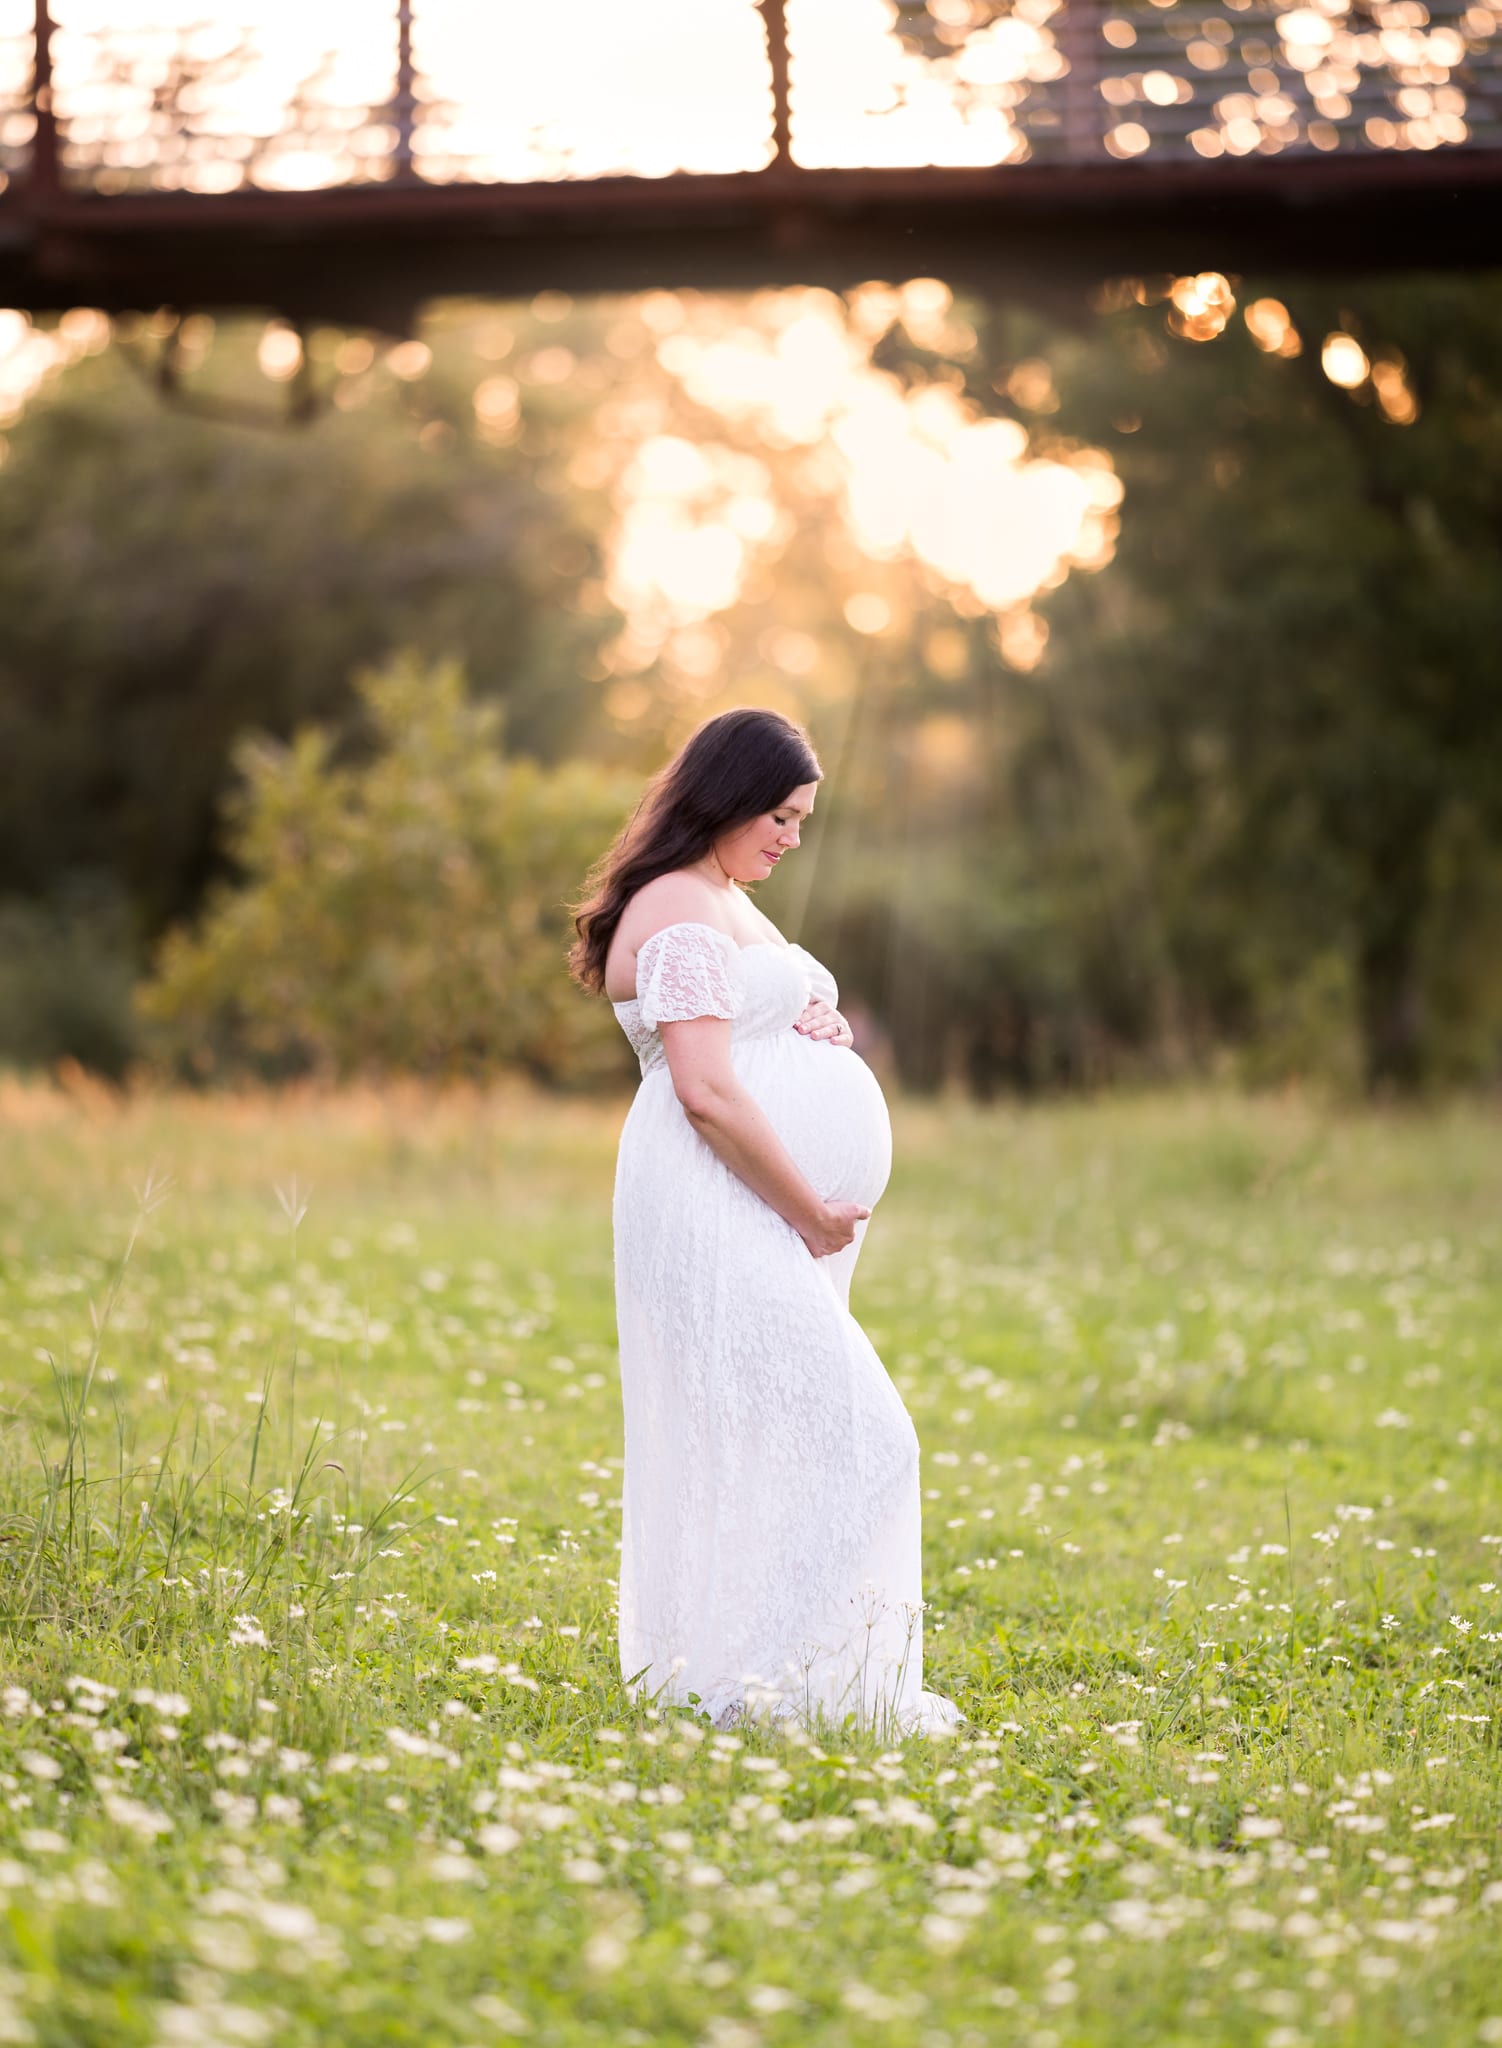 Maternity photo at sunset by Hello Photography,